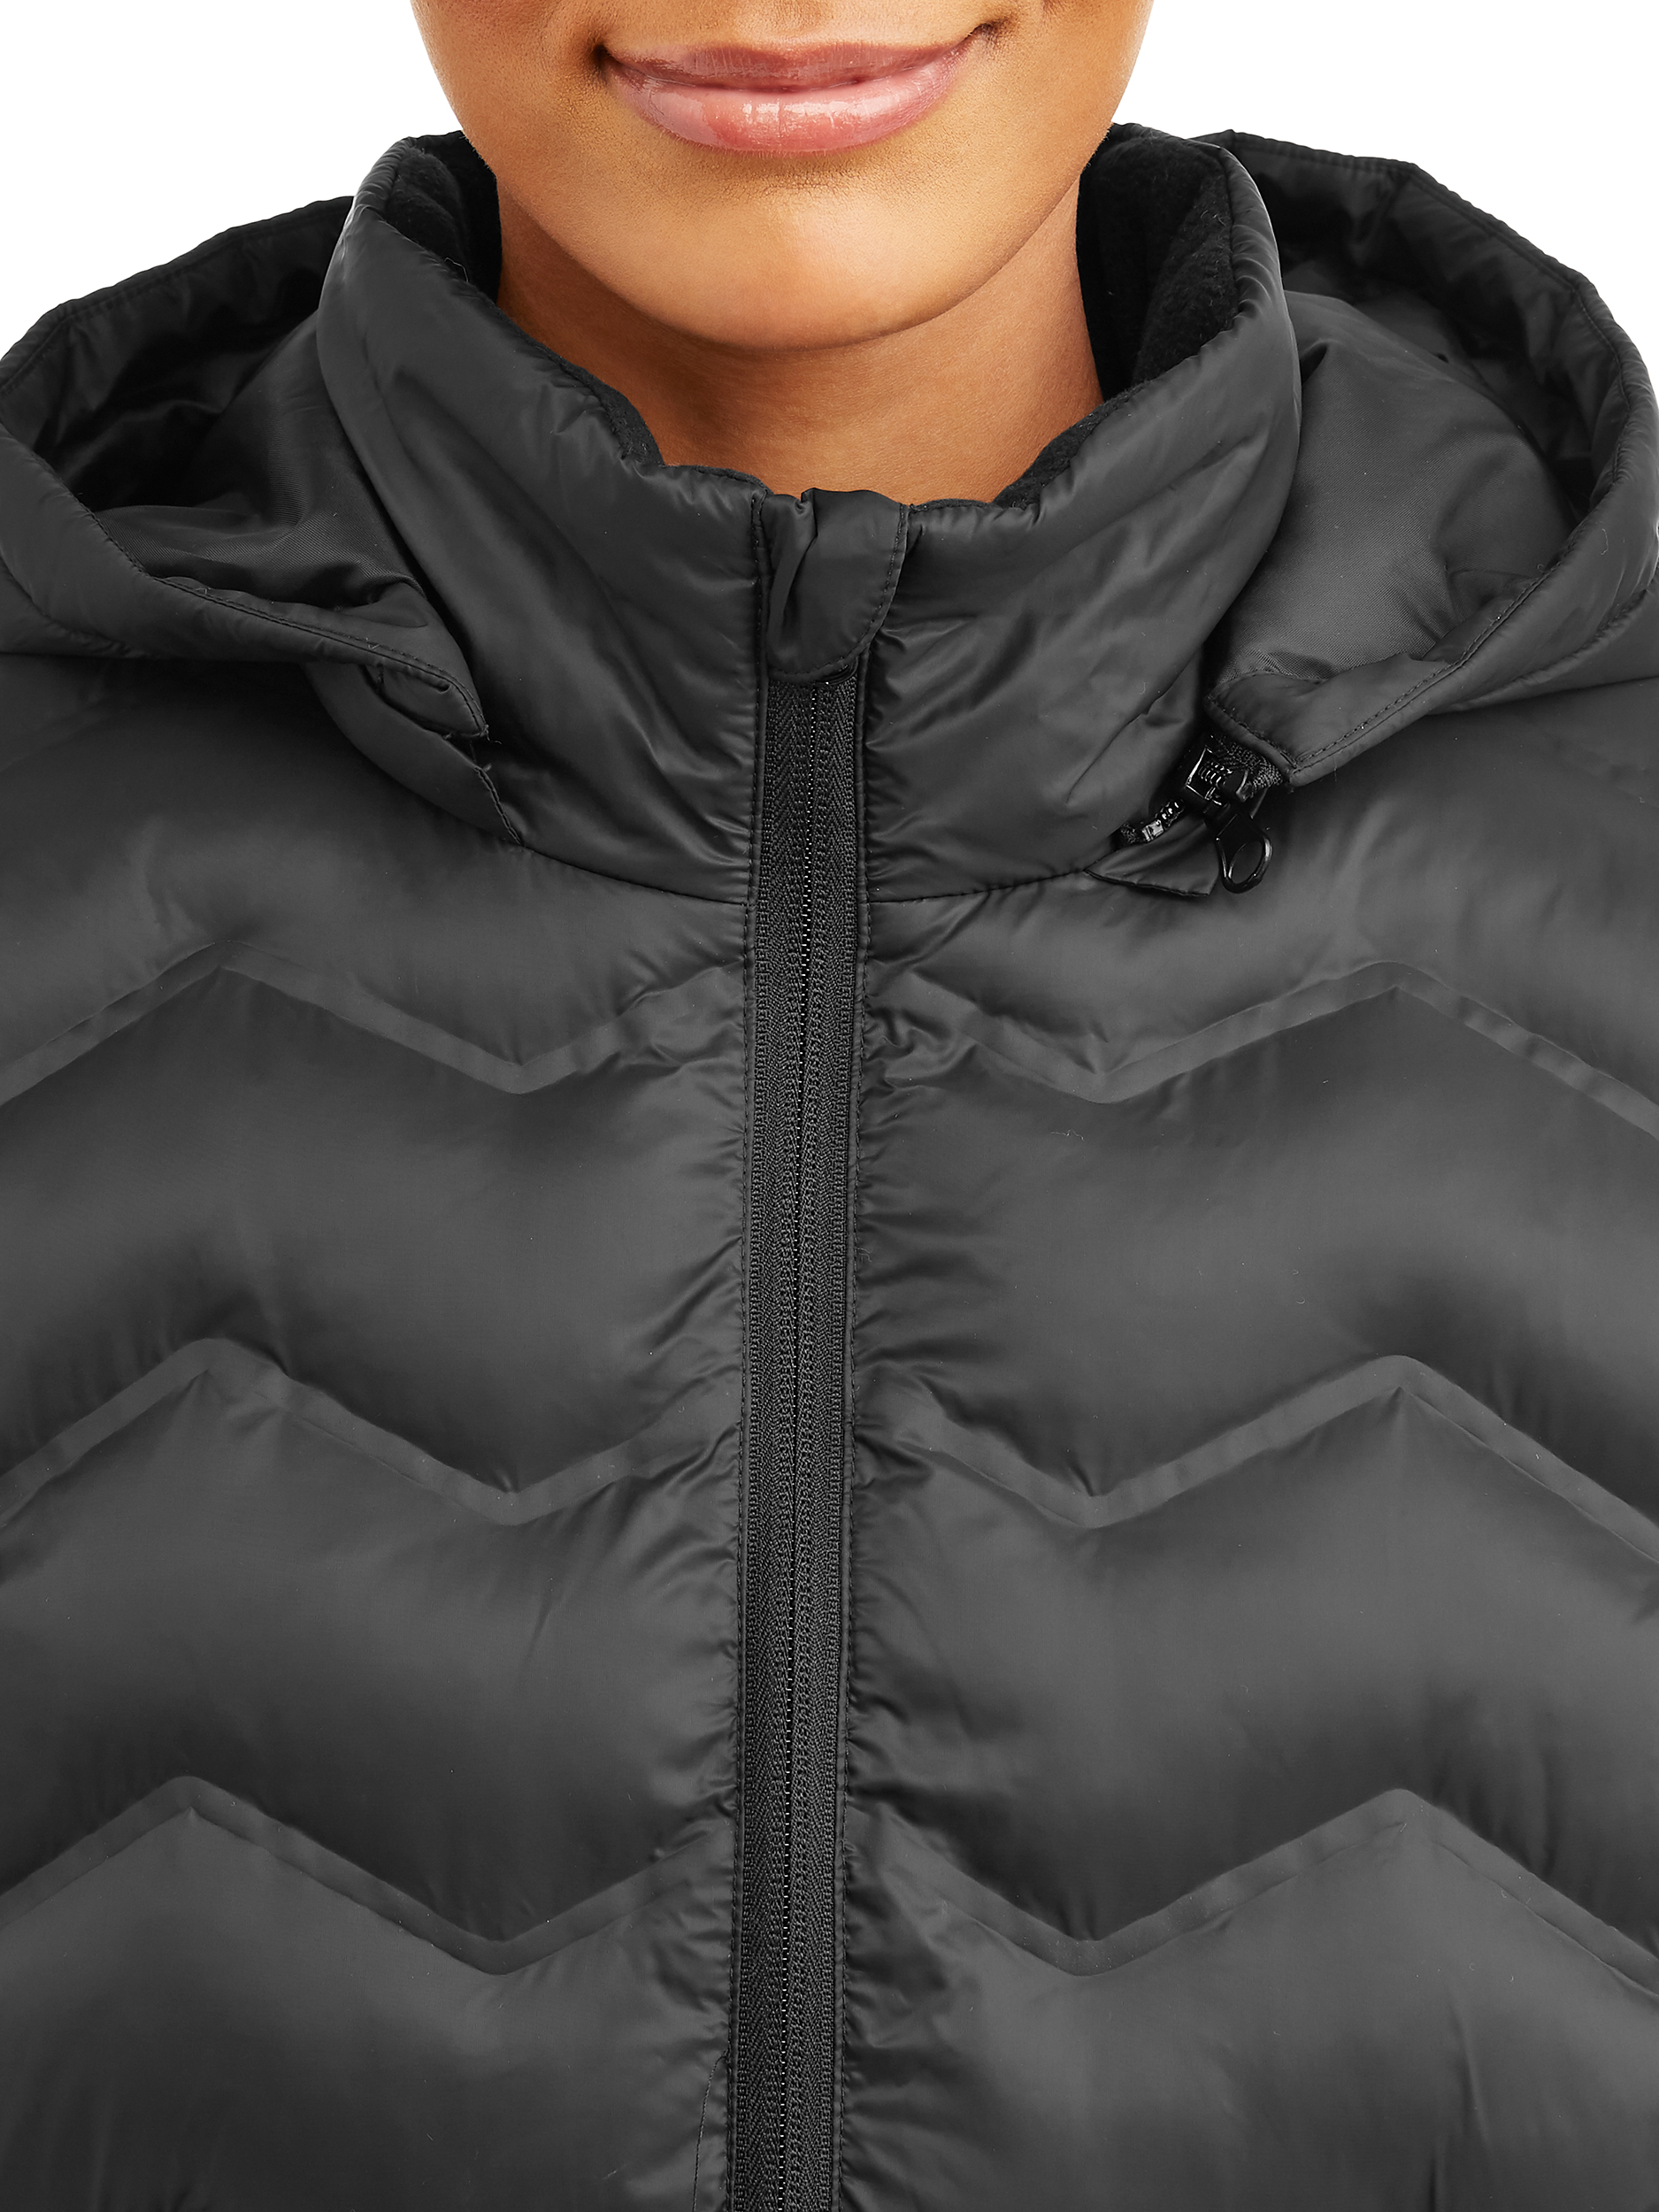 Time and Tru Women's Puffer Coat with Hood - image 3 of 4